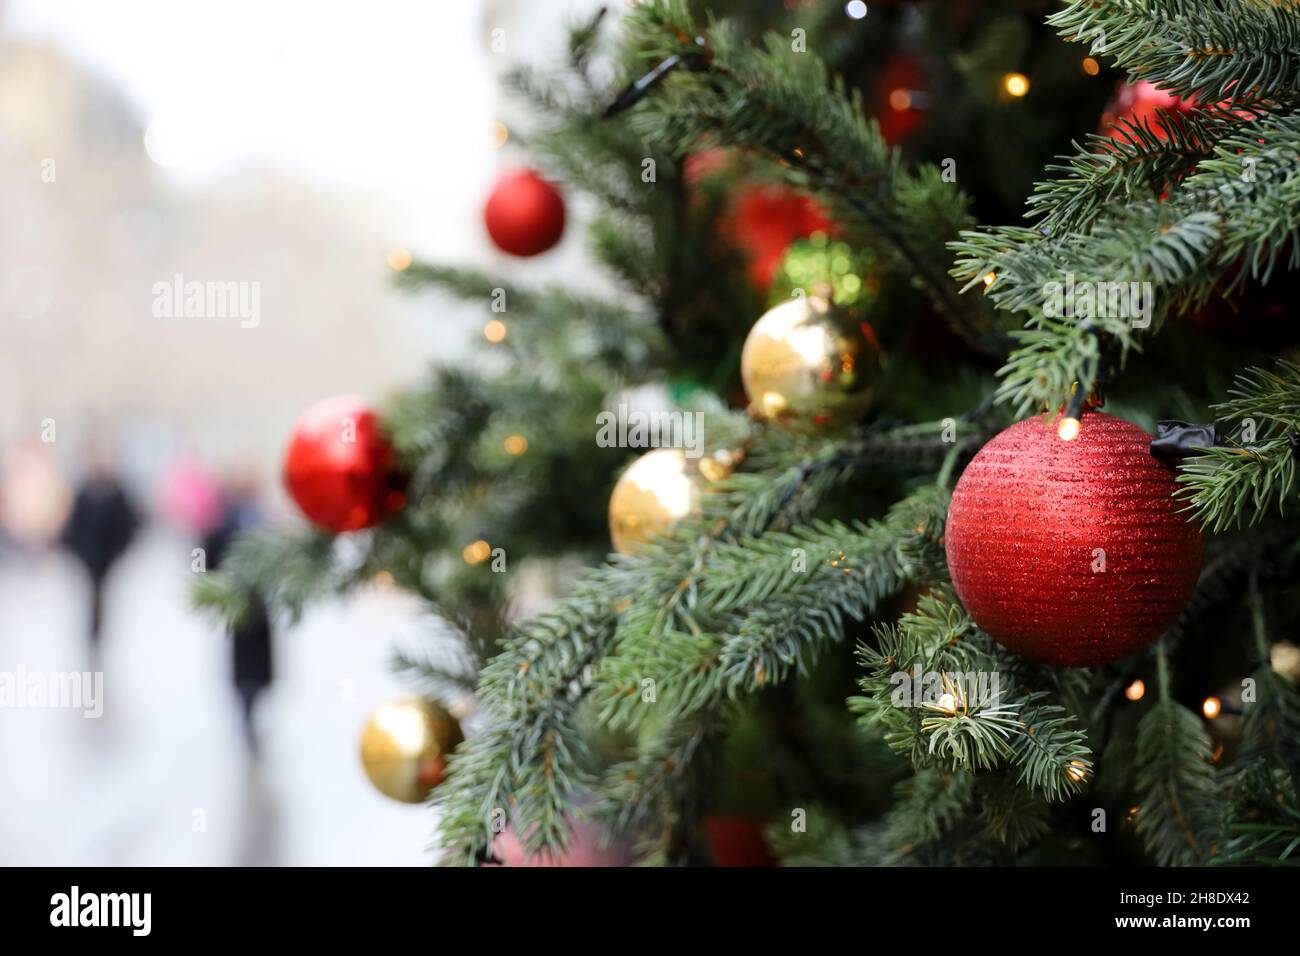 New Year decorations on a city street. Christmas tree with red and golden toy balls on blurred people background Stock Photo